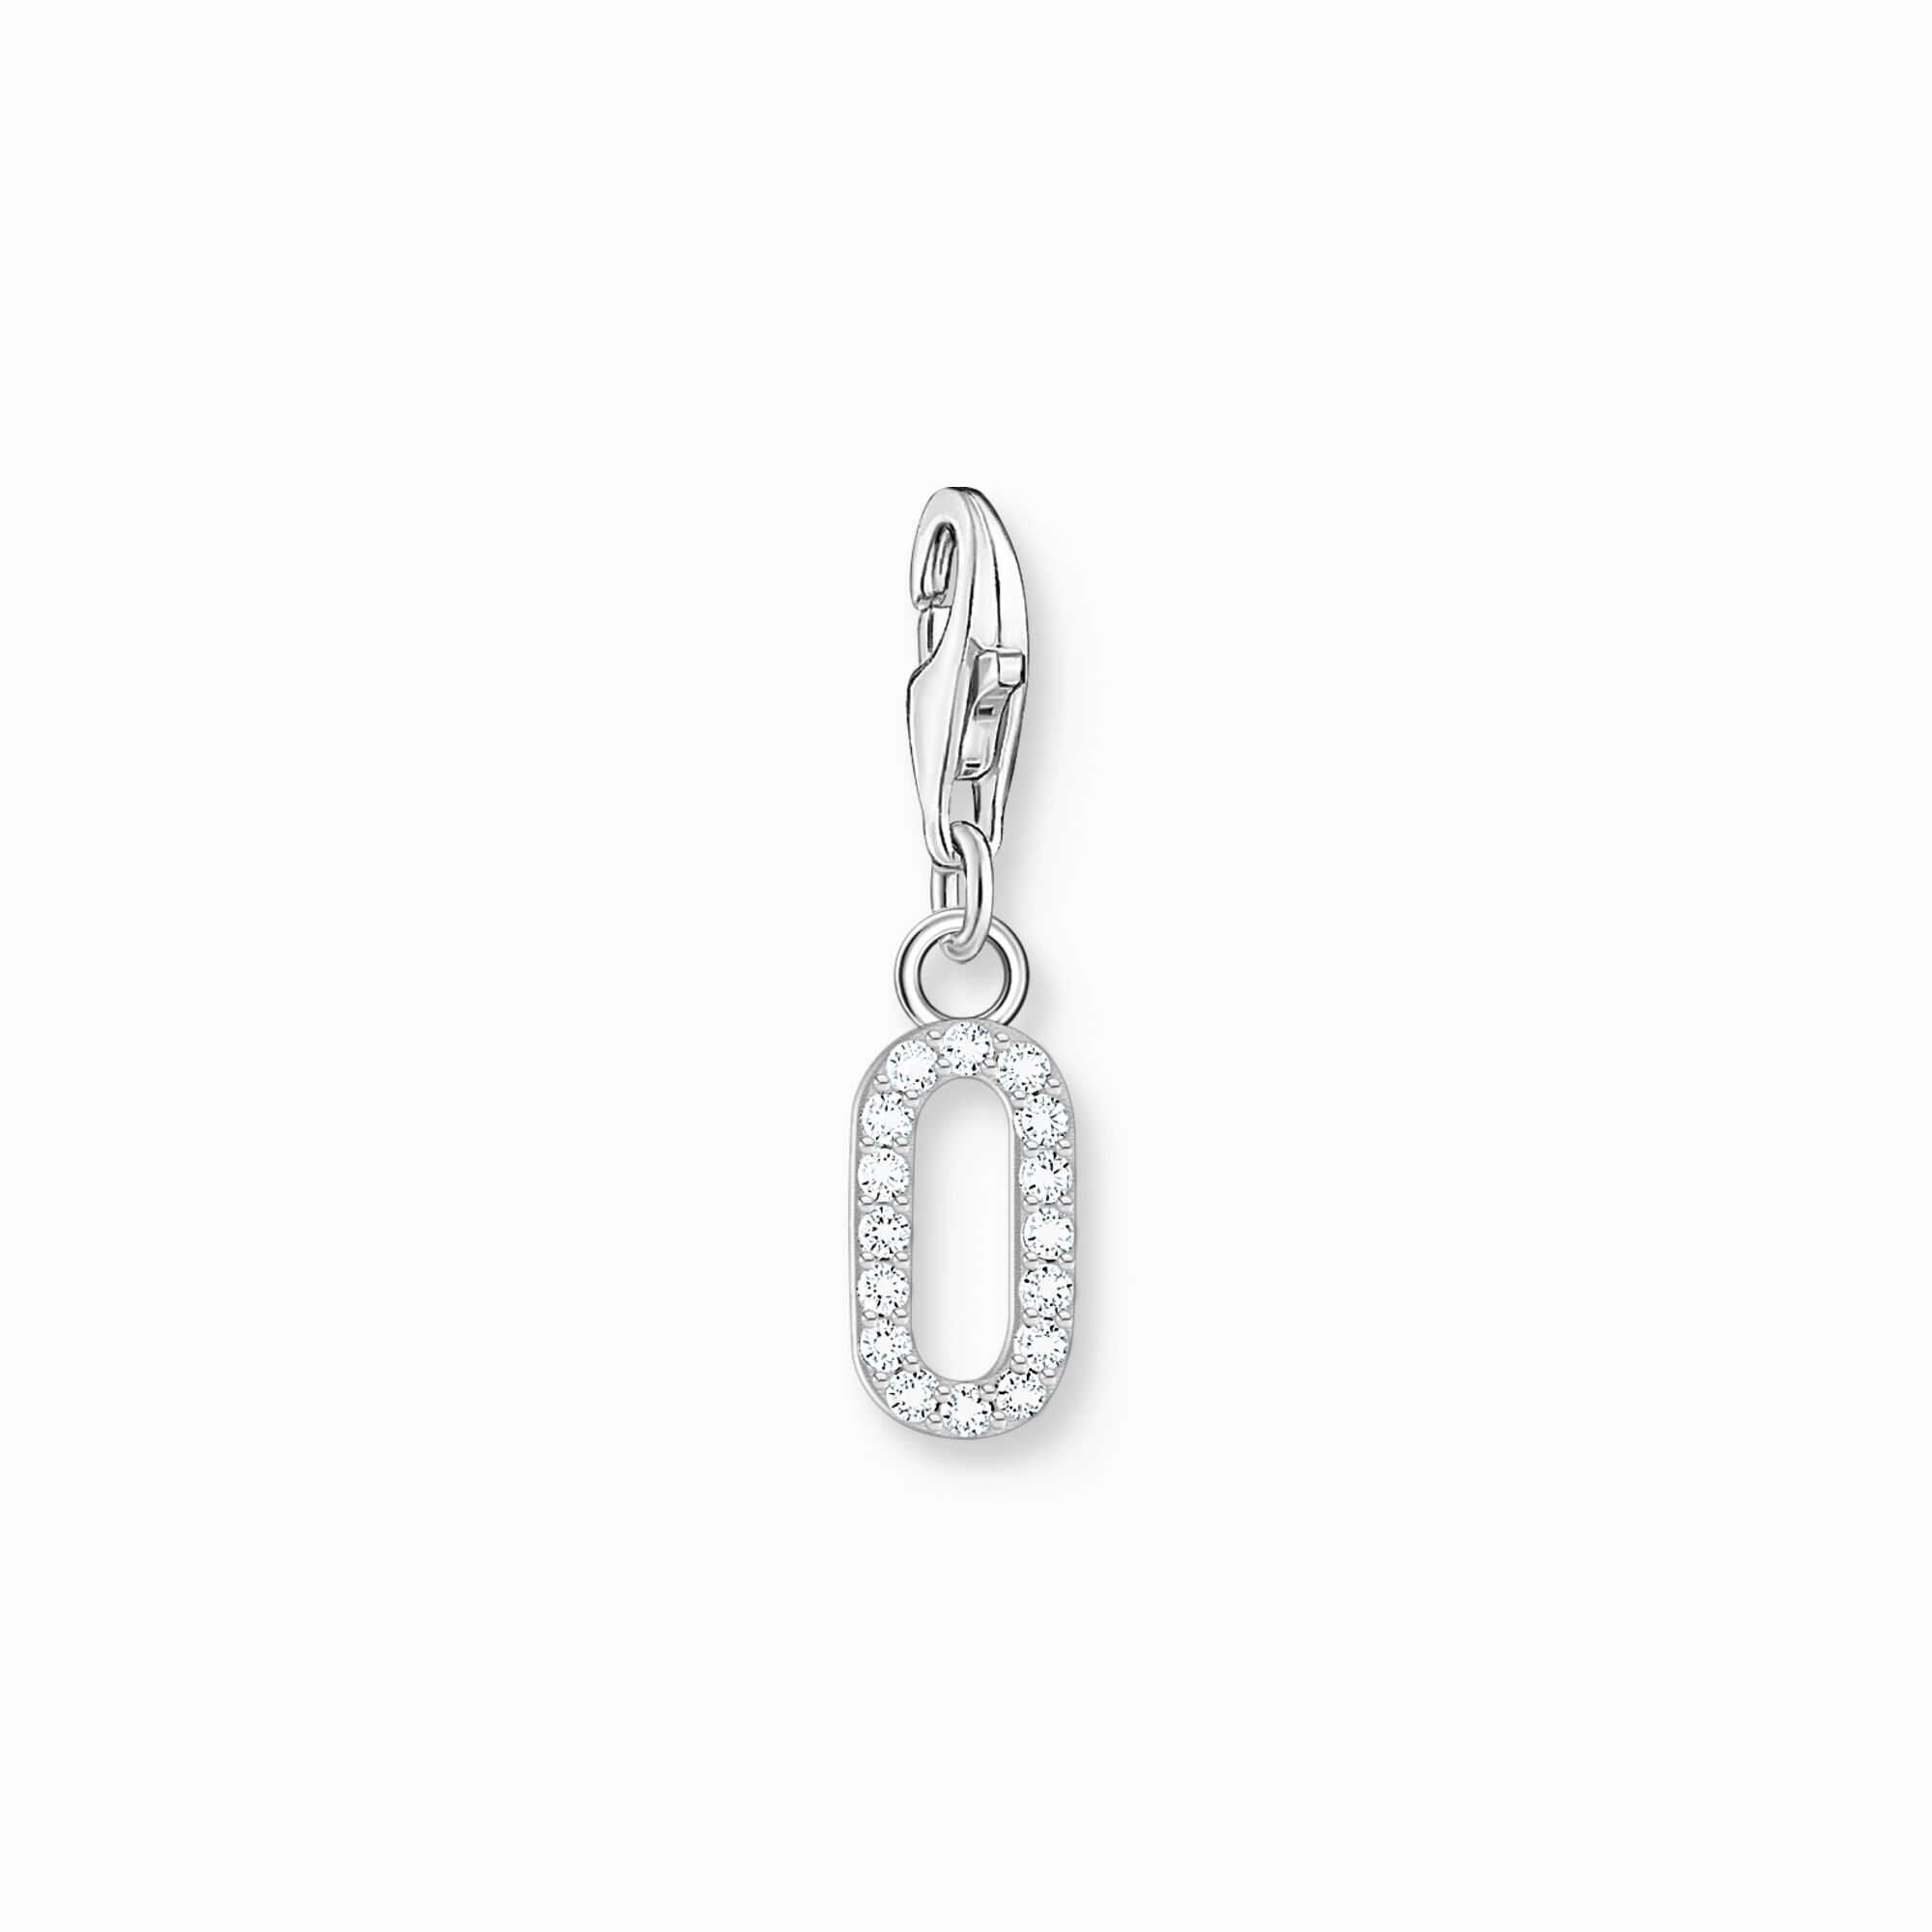 Silver charm pendant number 0 with zirconia from the Charm Club collection in the THOMAS SABO online store